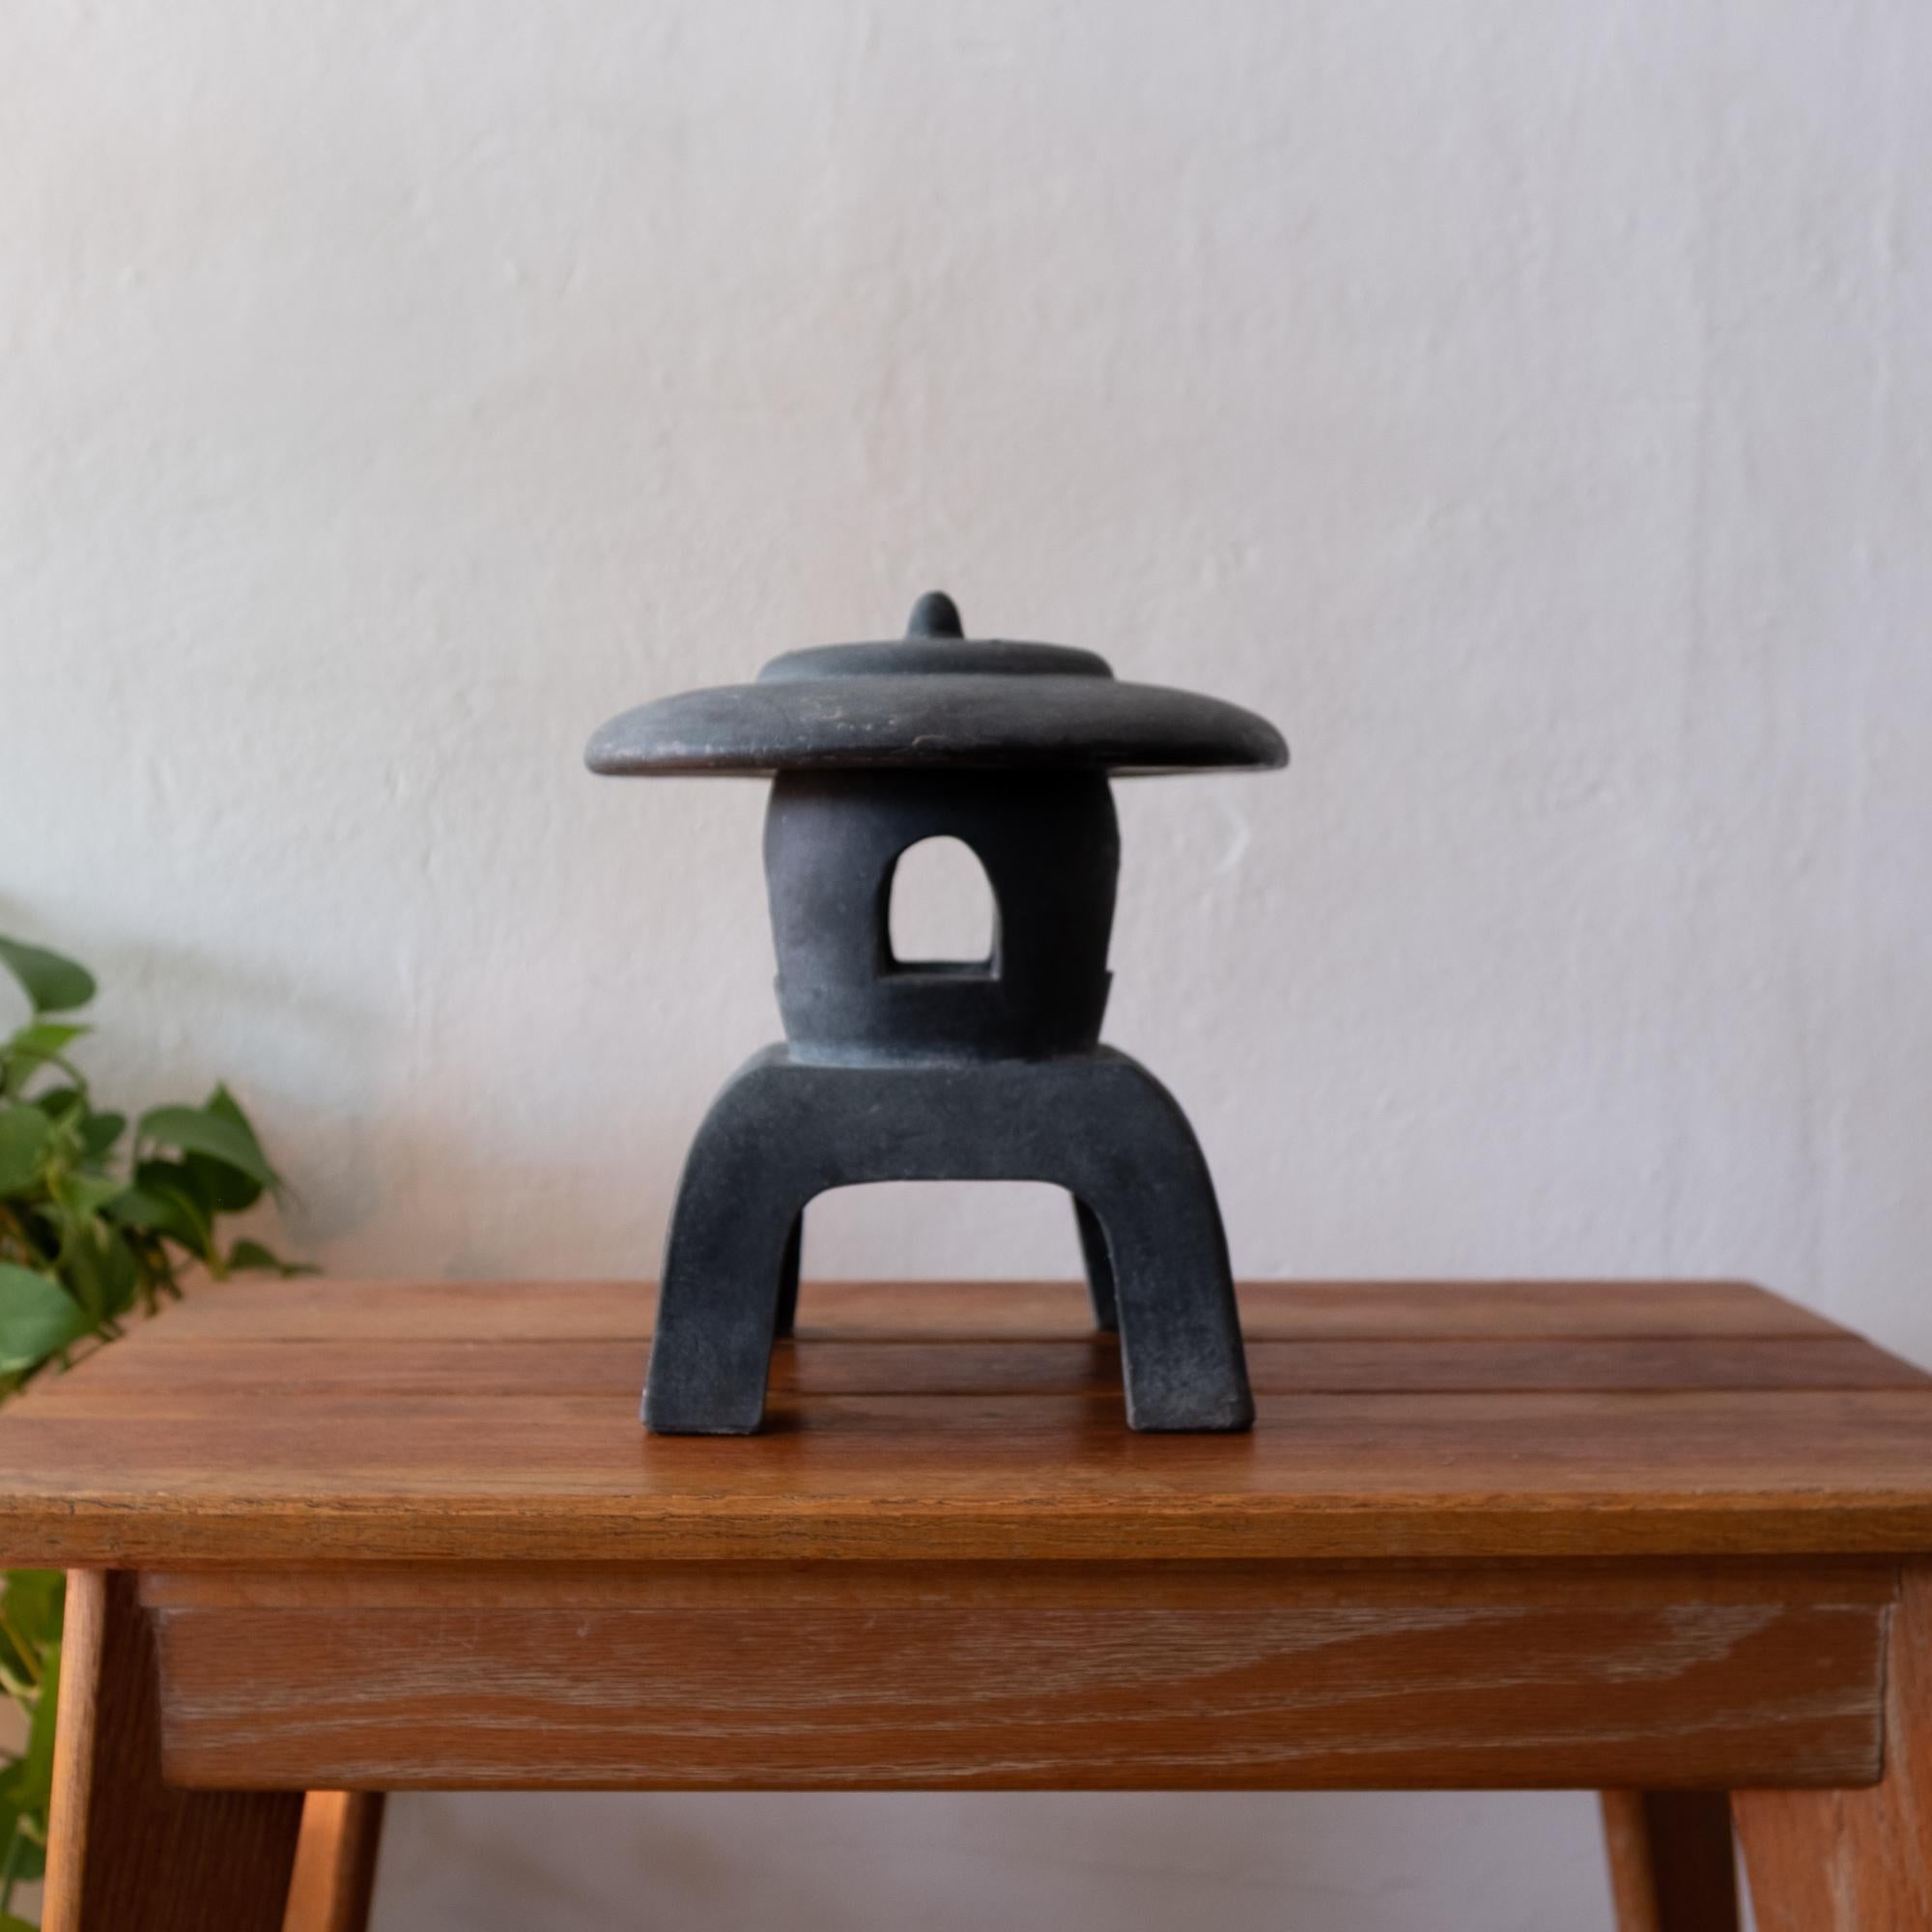 Black glazed over terracotta lantern. Removable top for a candle. Great Minimalist design.